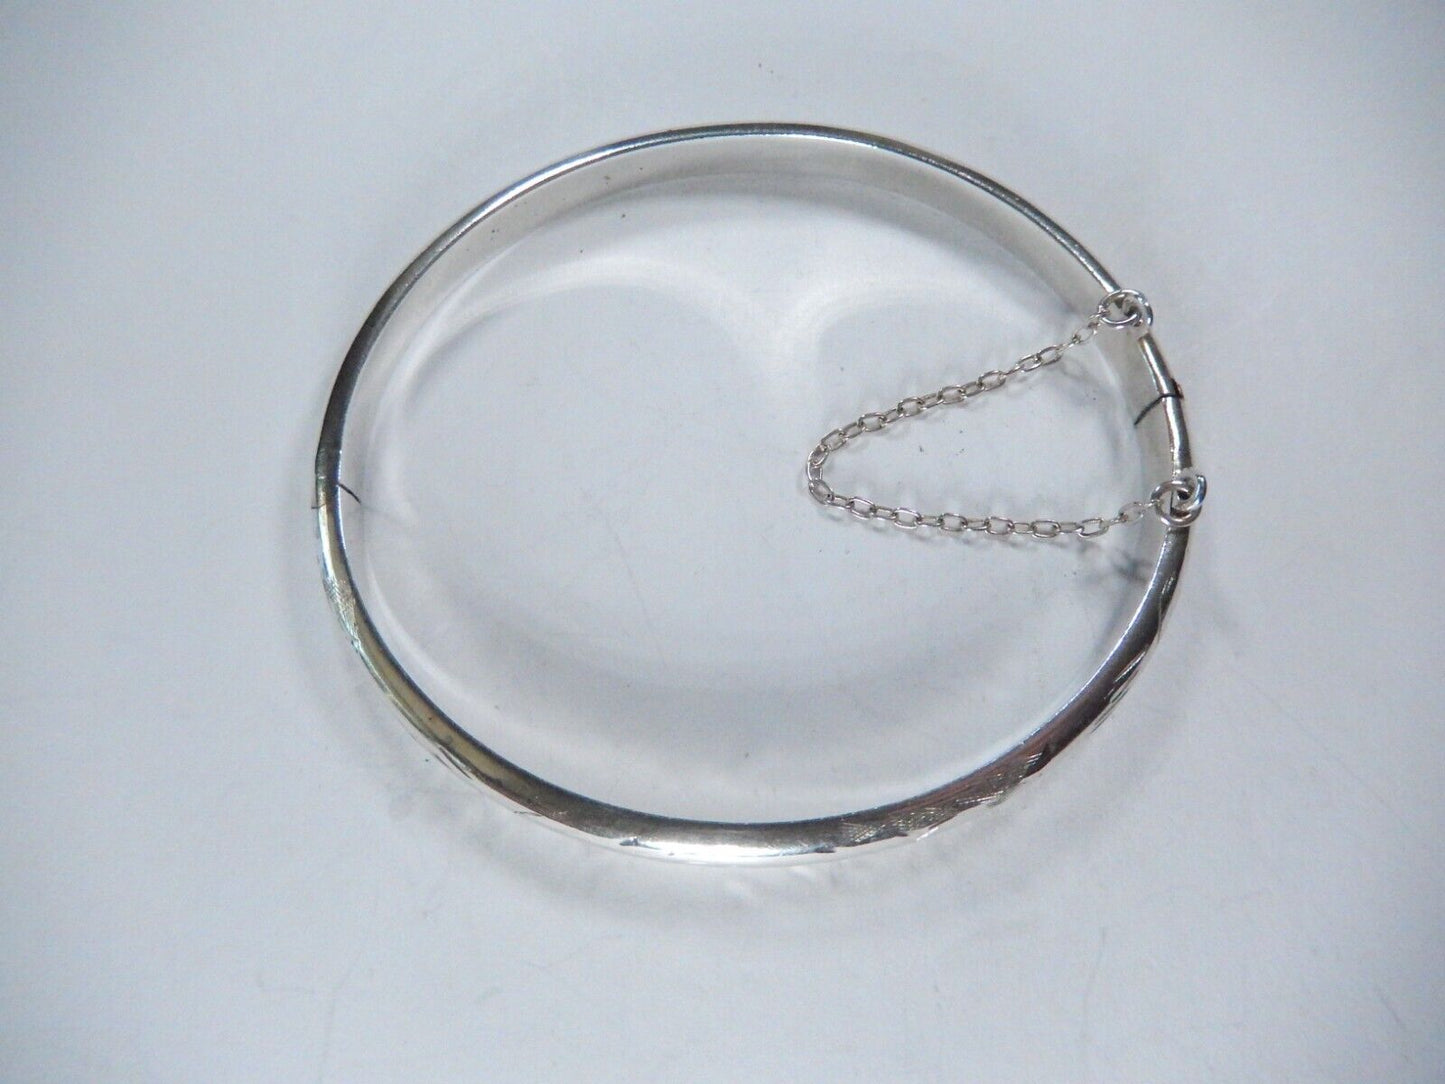 VINTAGE* 925 Etched Sterling Silver Hinged Bangle Bracelet w/ safety chain